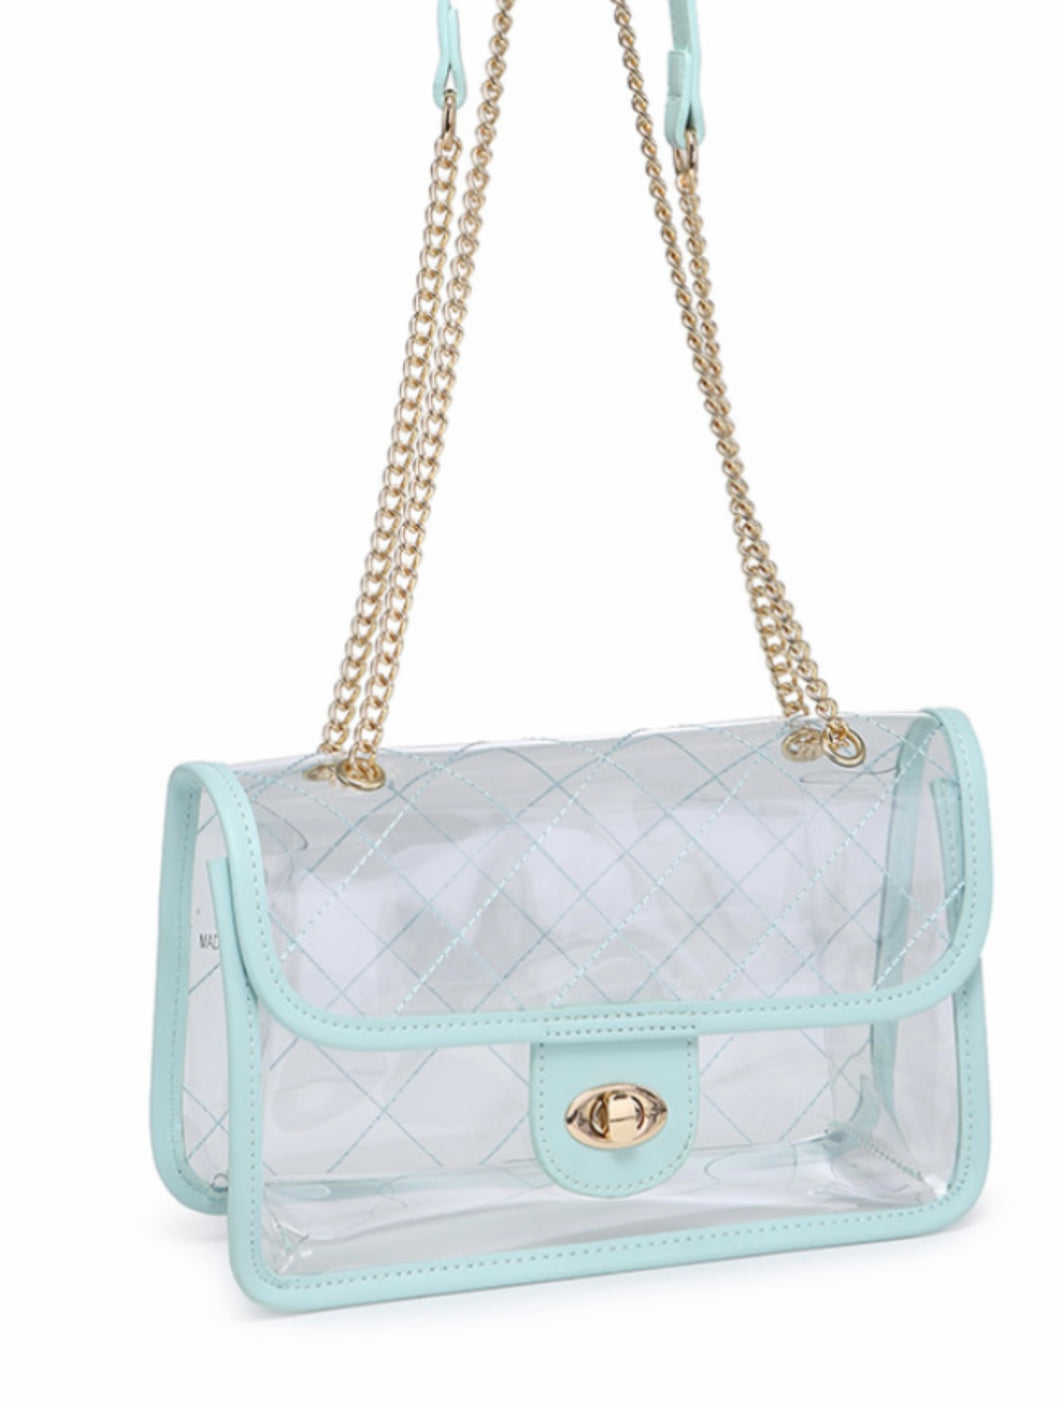 Clear Stadium Handbag - Wildfire and Lace